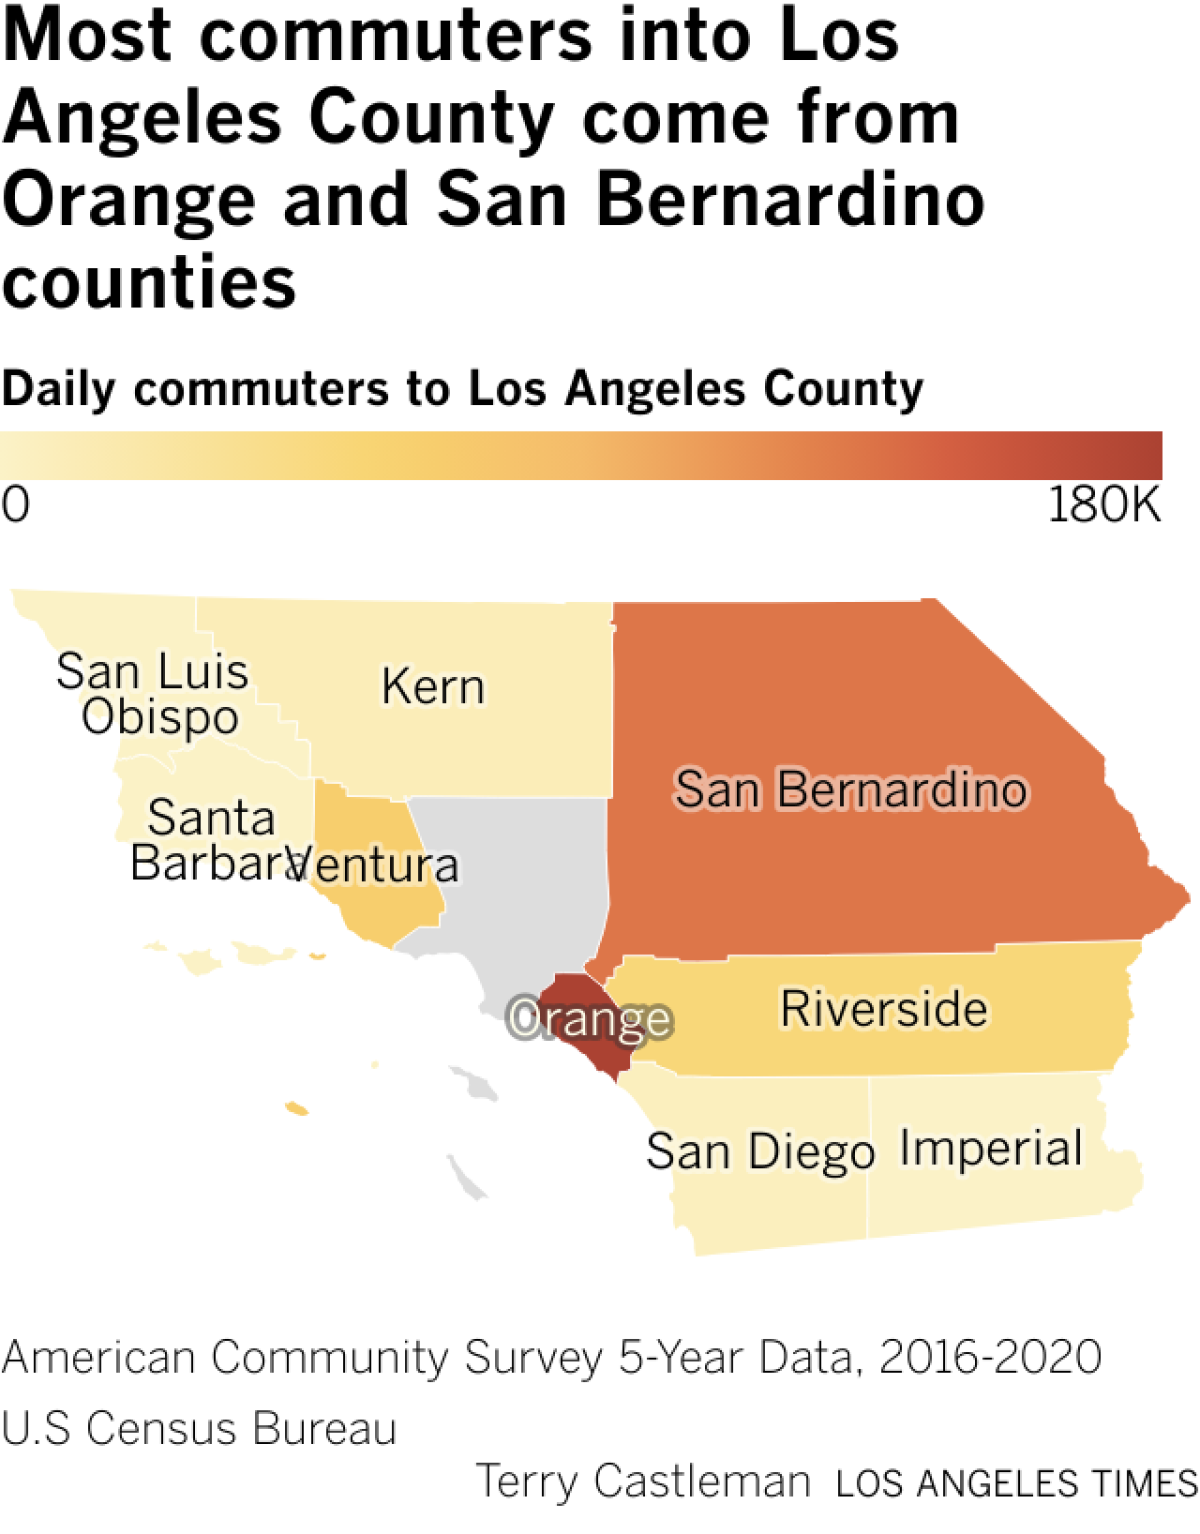 Map of Southern California counties showing Orange and San Bernardino counties contribute the most daily commuters to Los Angeles county.